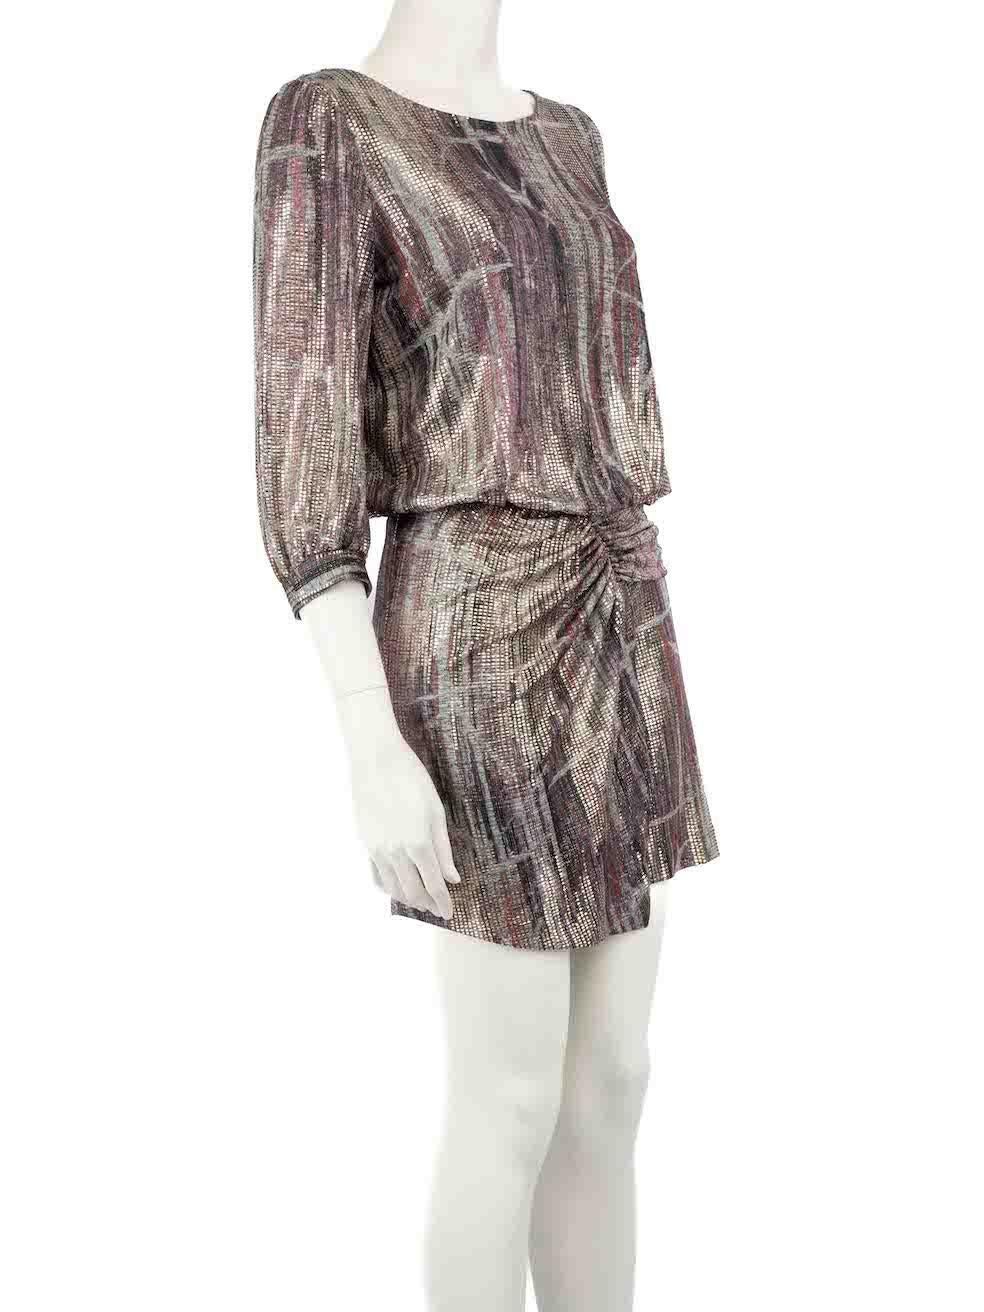 CONDITION is Very good. Hardly any visible wear to dress is evident on this used ba&sh designer resale item.
 
 
 
 Details
 
 
 Multicolour metallic
 
 Polyester
 
 Dress
 
 Abstract pattern
 
 Open back
 
 Round neck
 
 Long sleeves
 
 Mini
 
